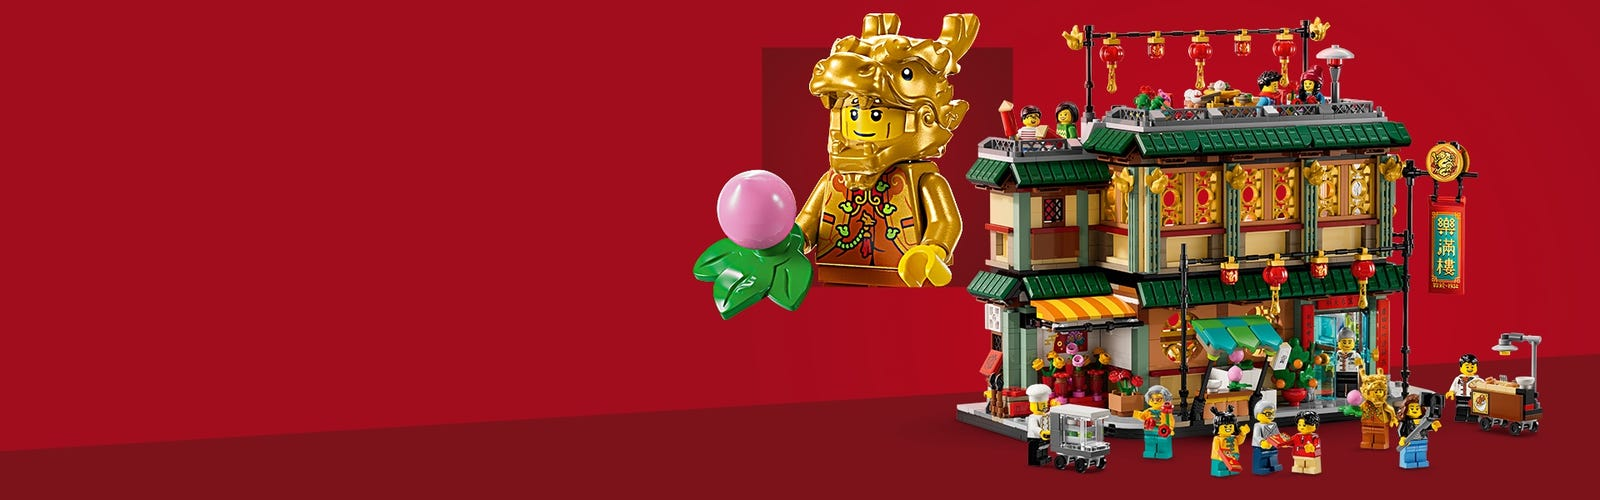 Access exclusive deals, coupons, offers and cashback on Build Endless Adventures with LEGO Sets through OODLZ courtesy of LEGO.